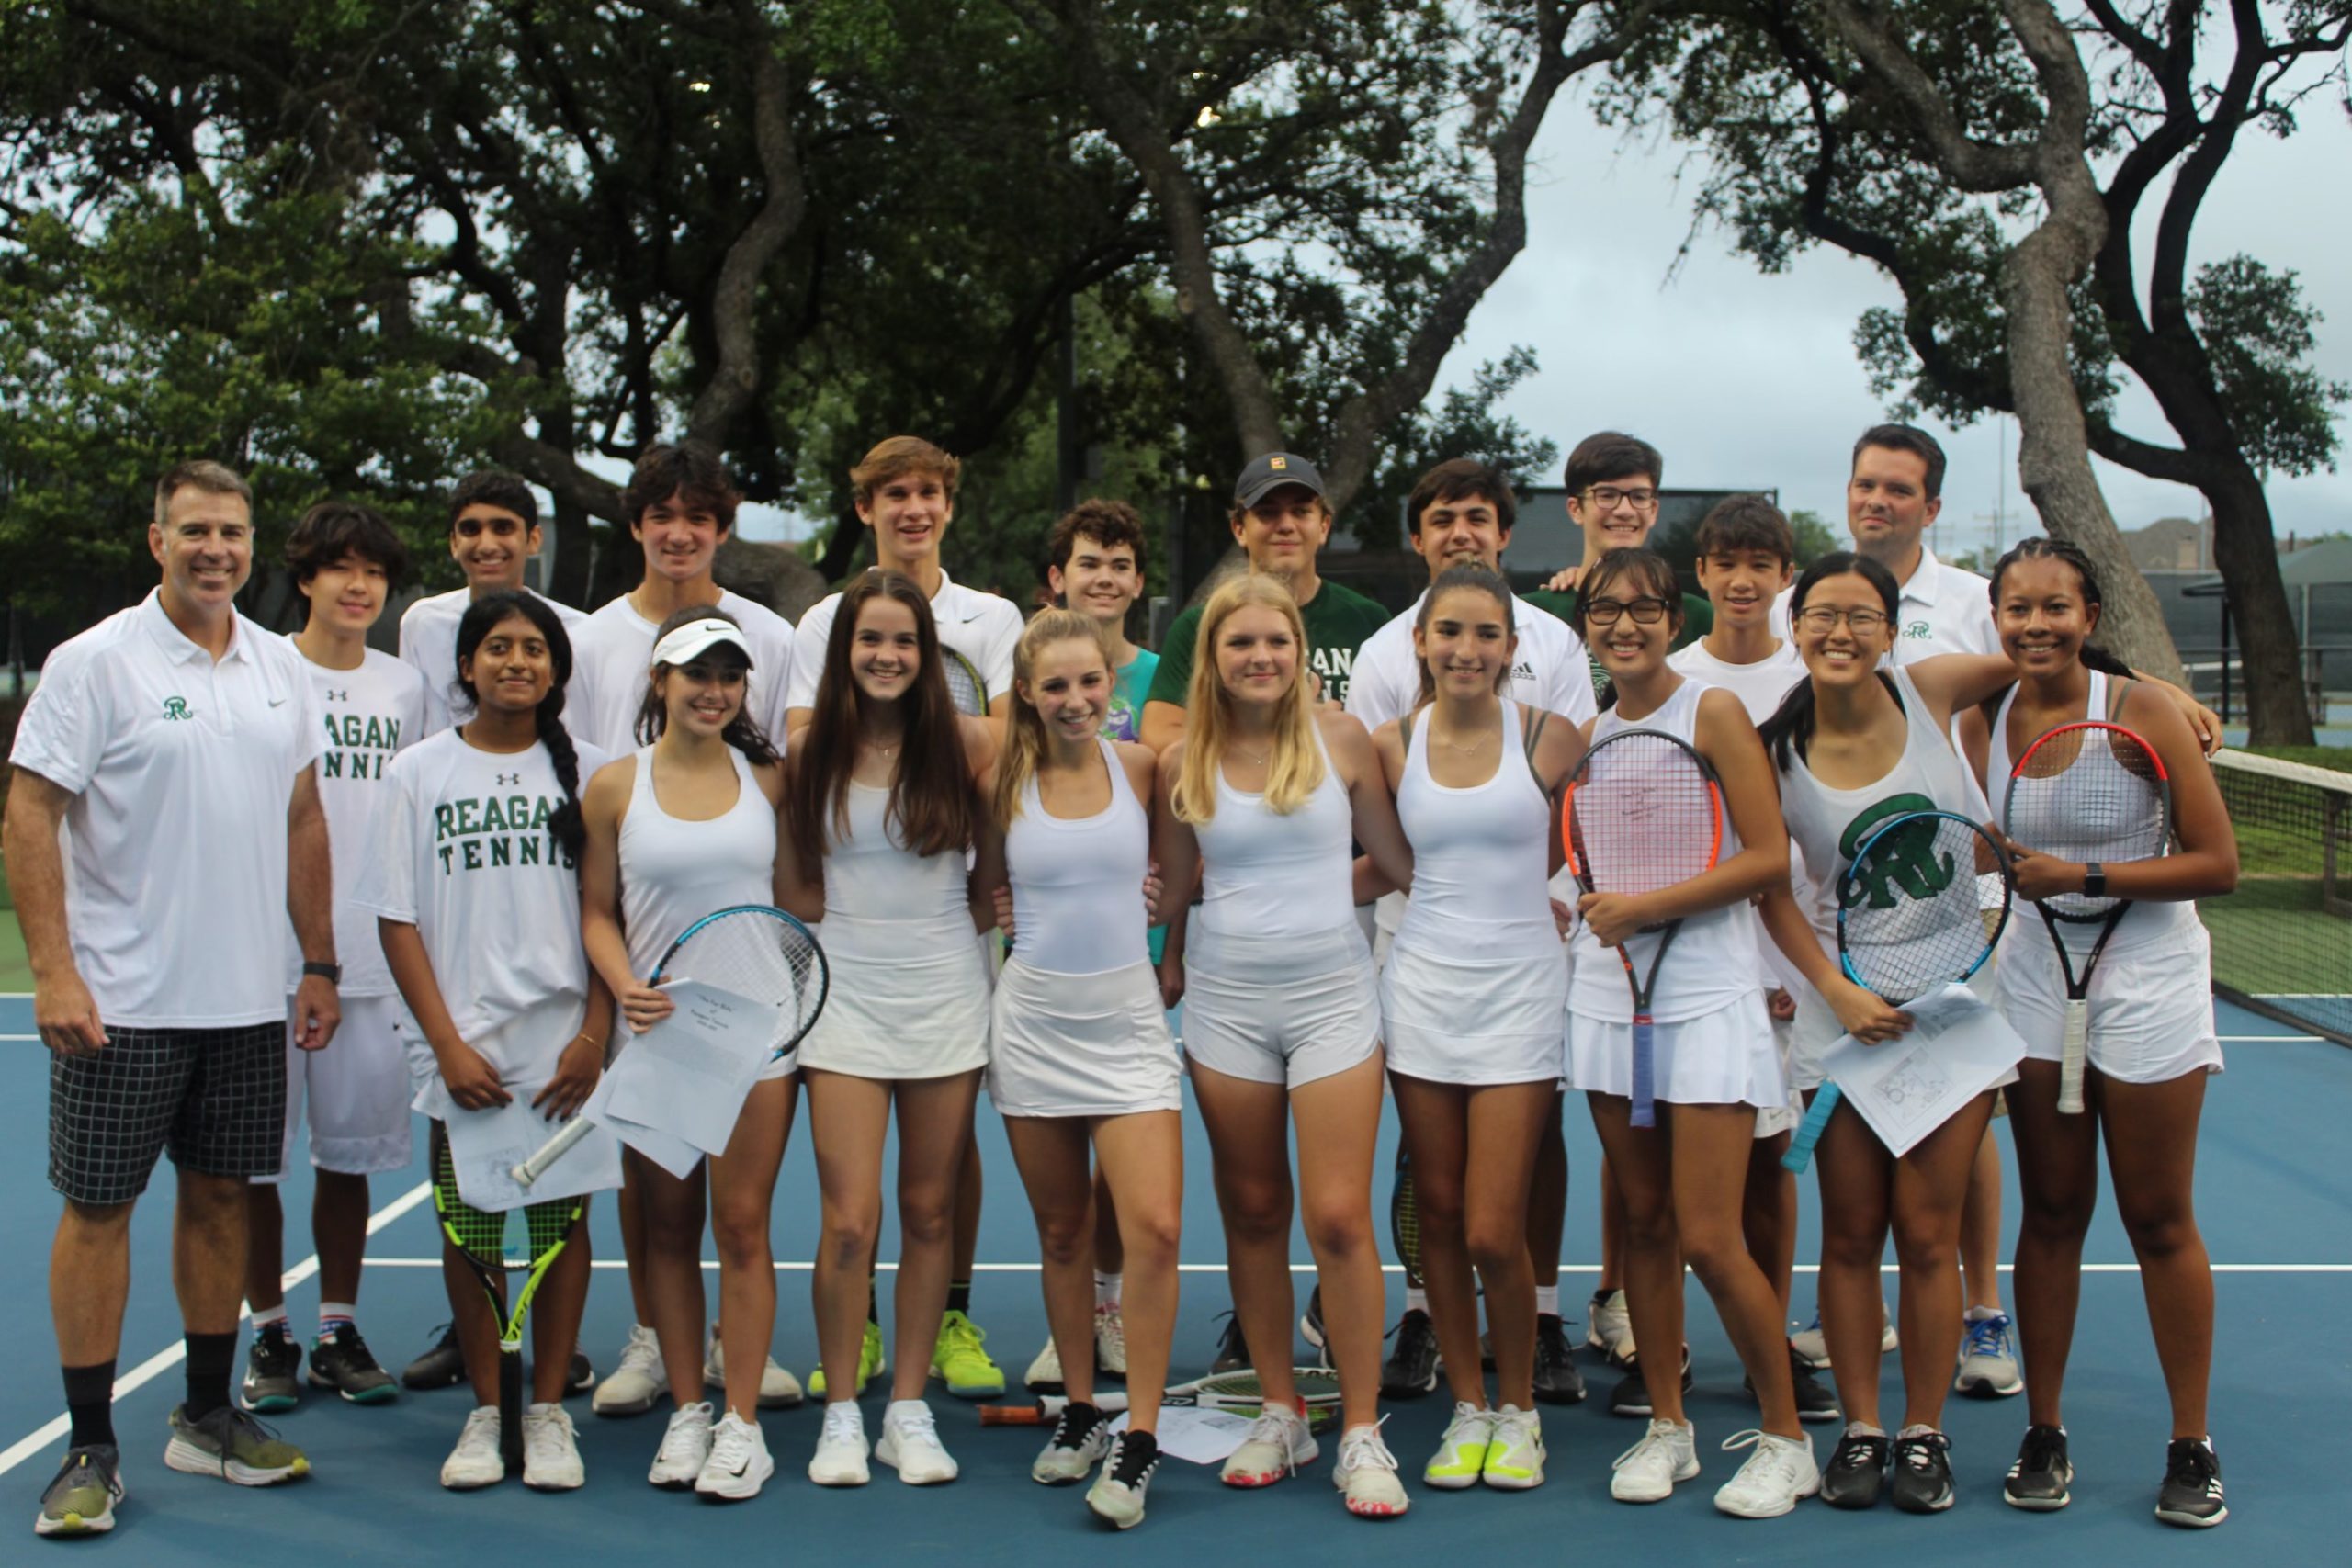 reagan-tennis-tryout-information-for-2021-2022-school-year-rattler-sports